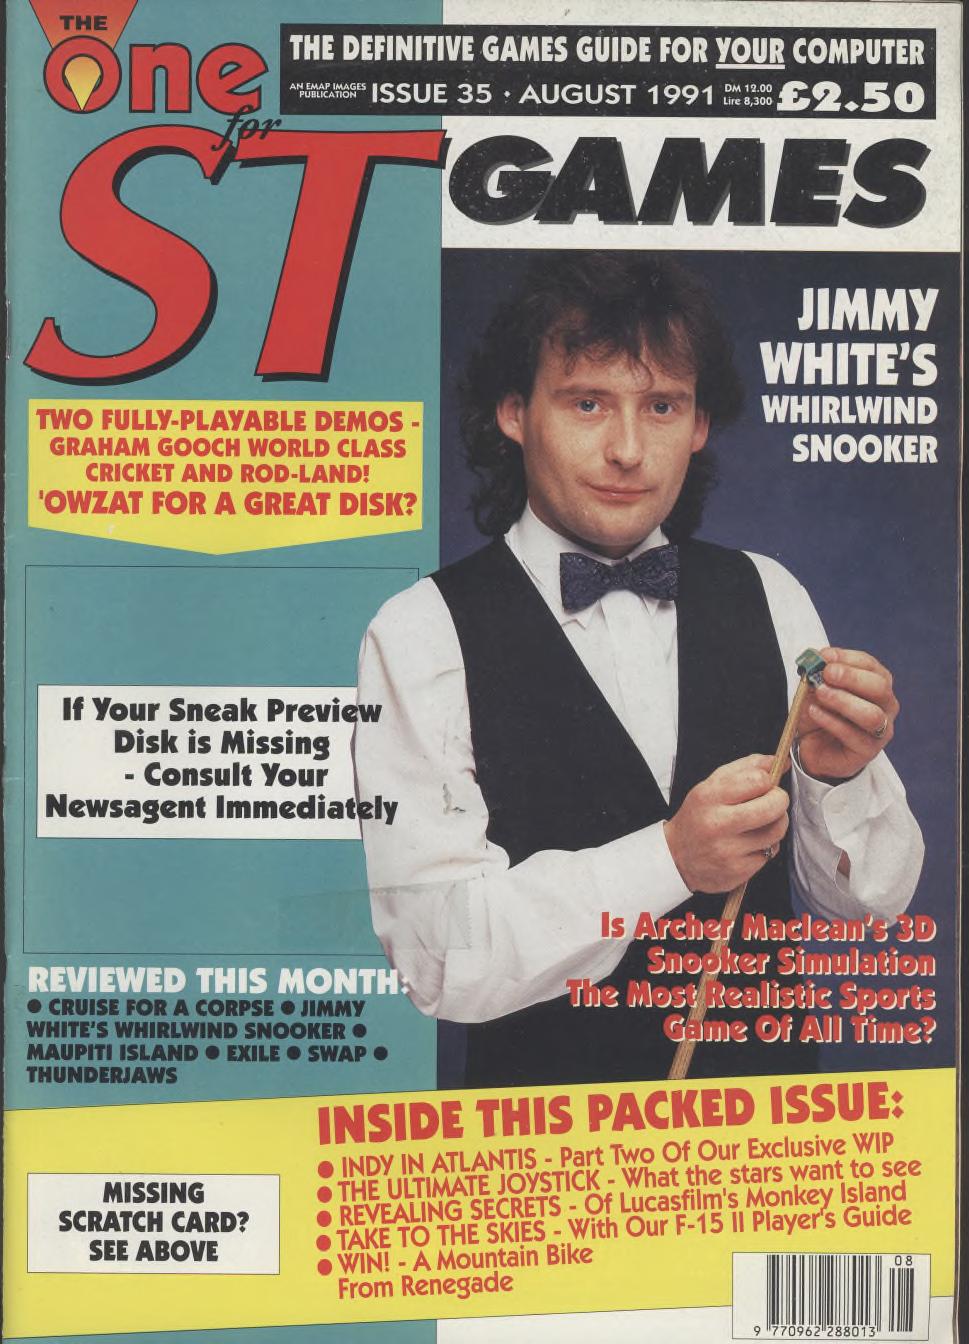 Cover for The One 35 (Aug 1991)